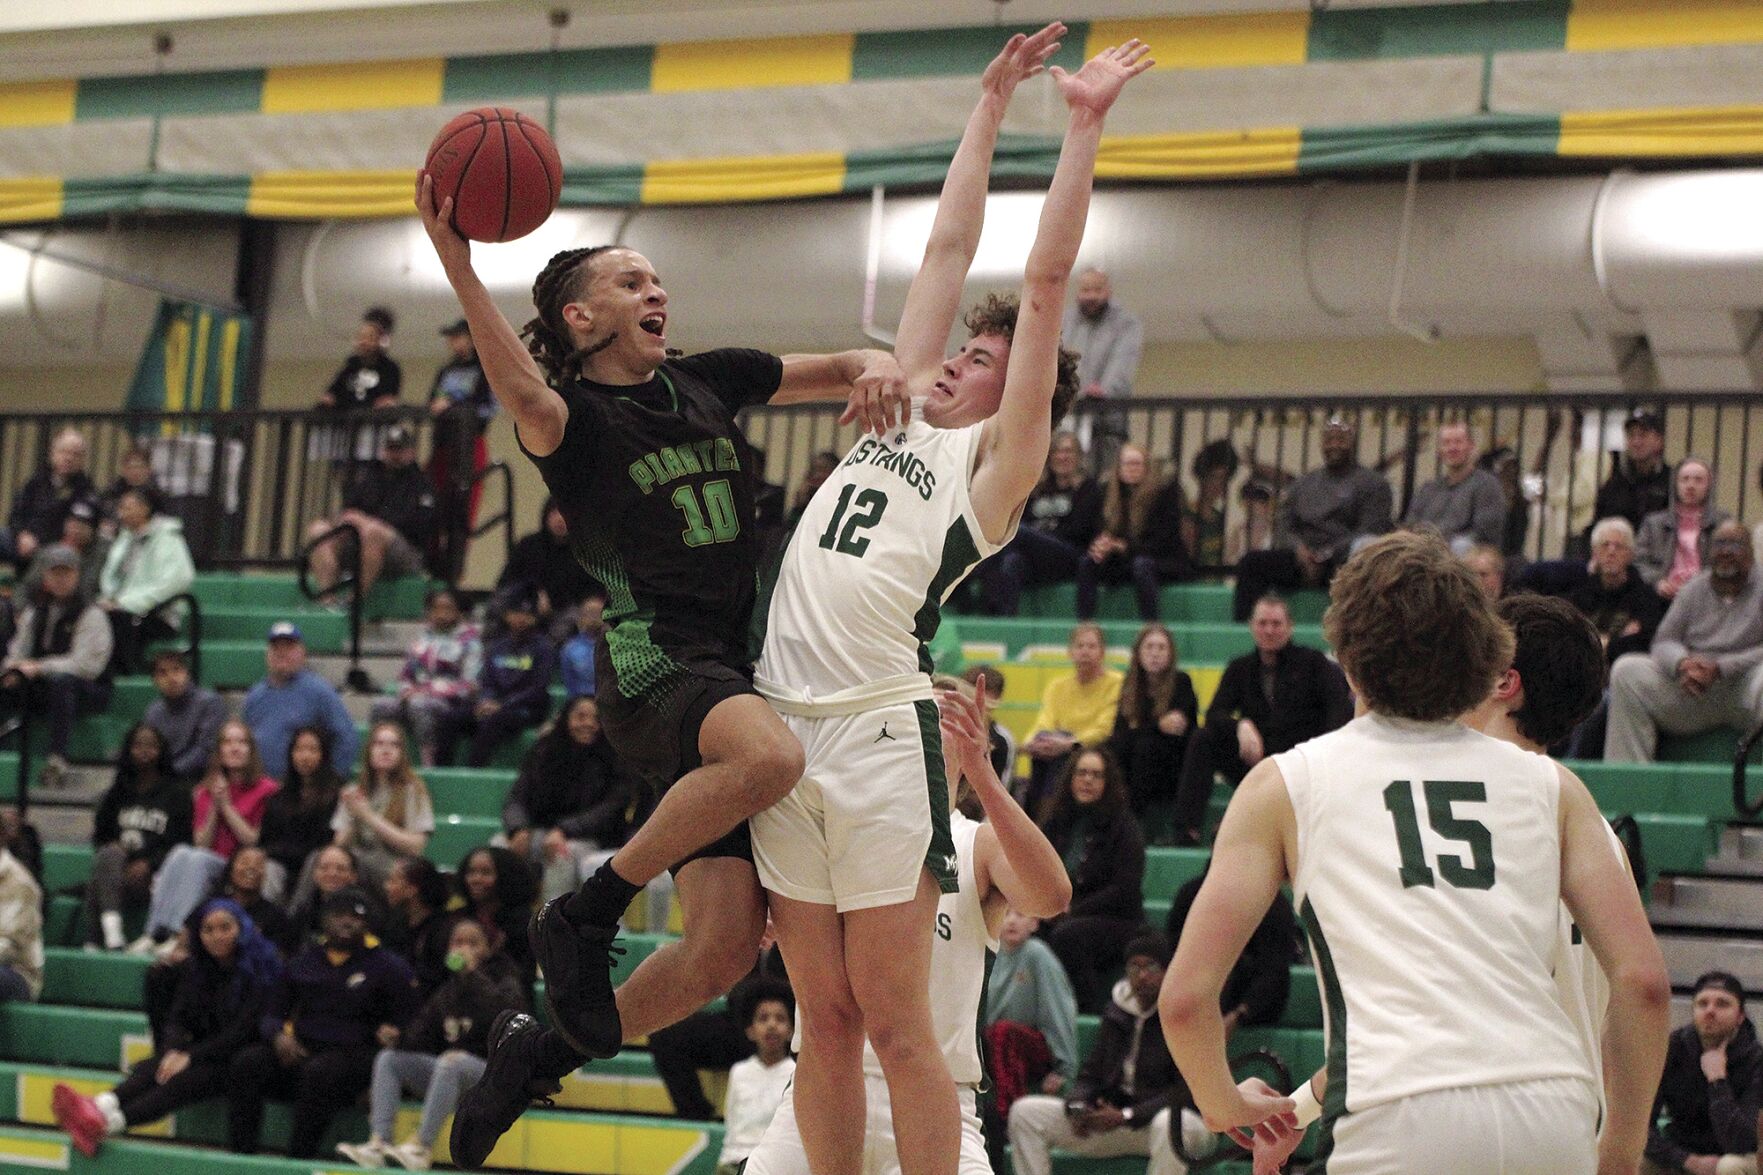 Park Center boys hoops clinches spot in section final